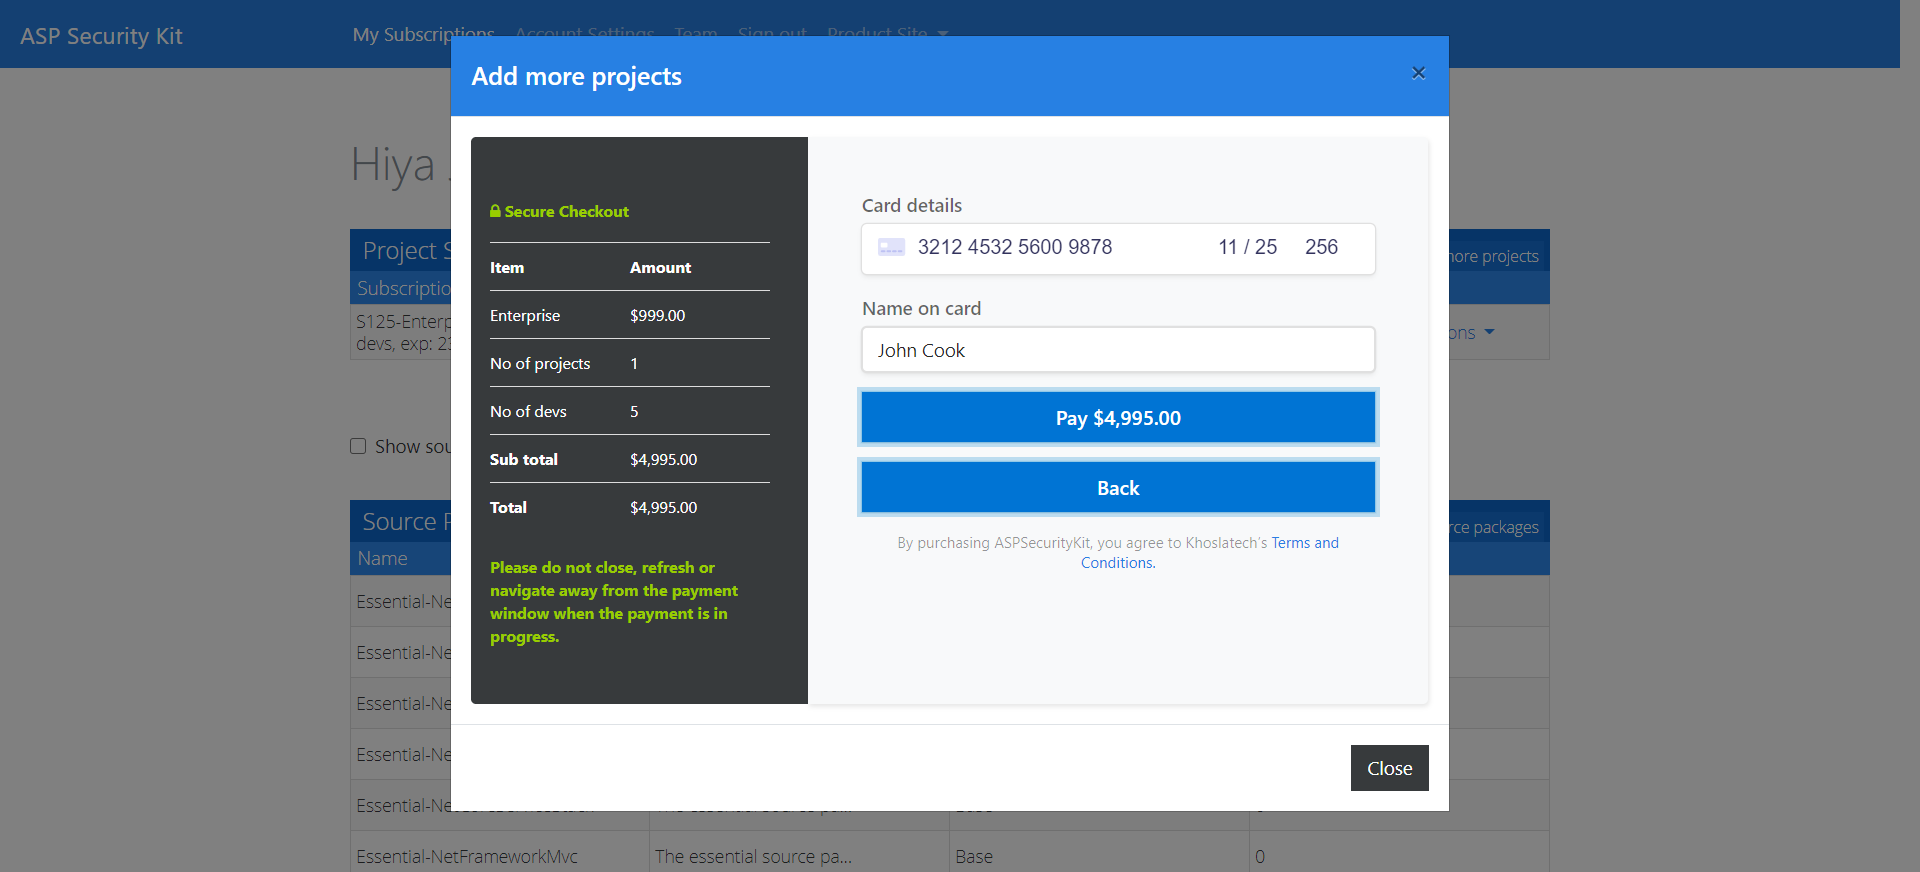 Add more projects payment details popup